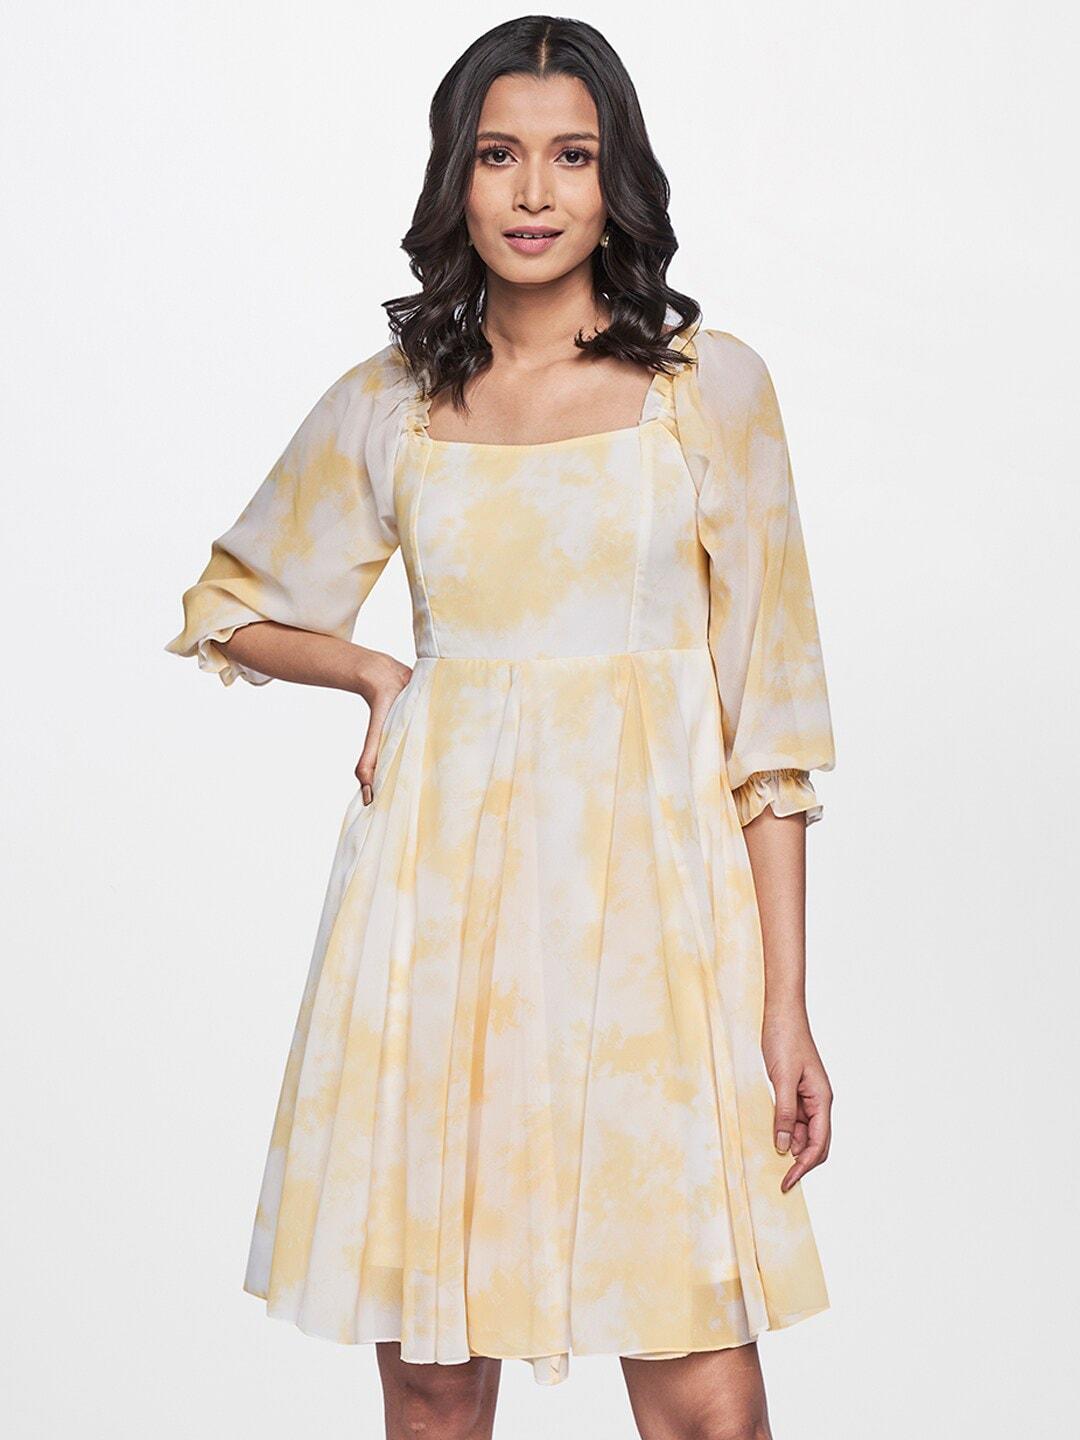 and-yellow-georgette-sheath-dress